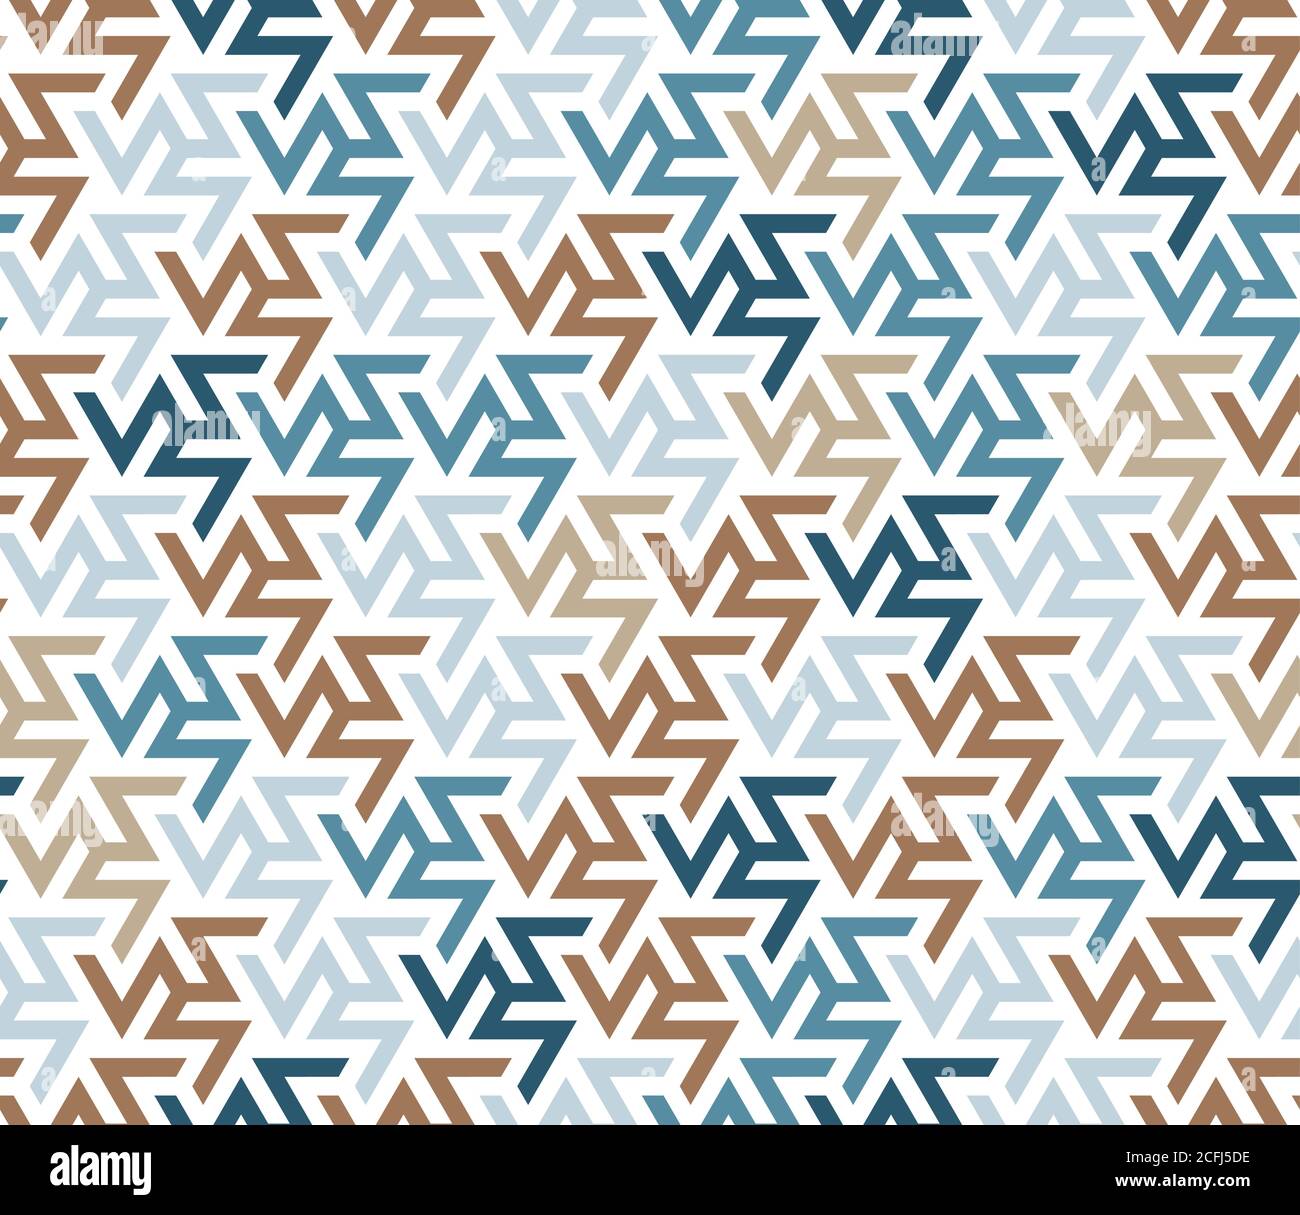 Iranian zigzag color mix vector pattern. Seamless geometric repeating texture pattern for fabric design, cloth, textile. Stock Vector